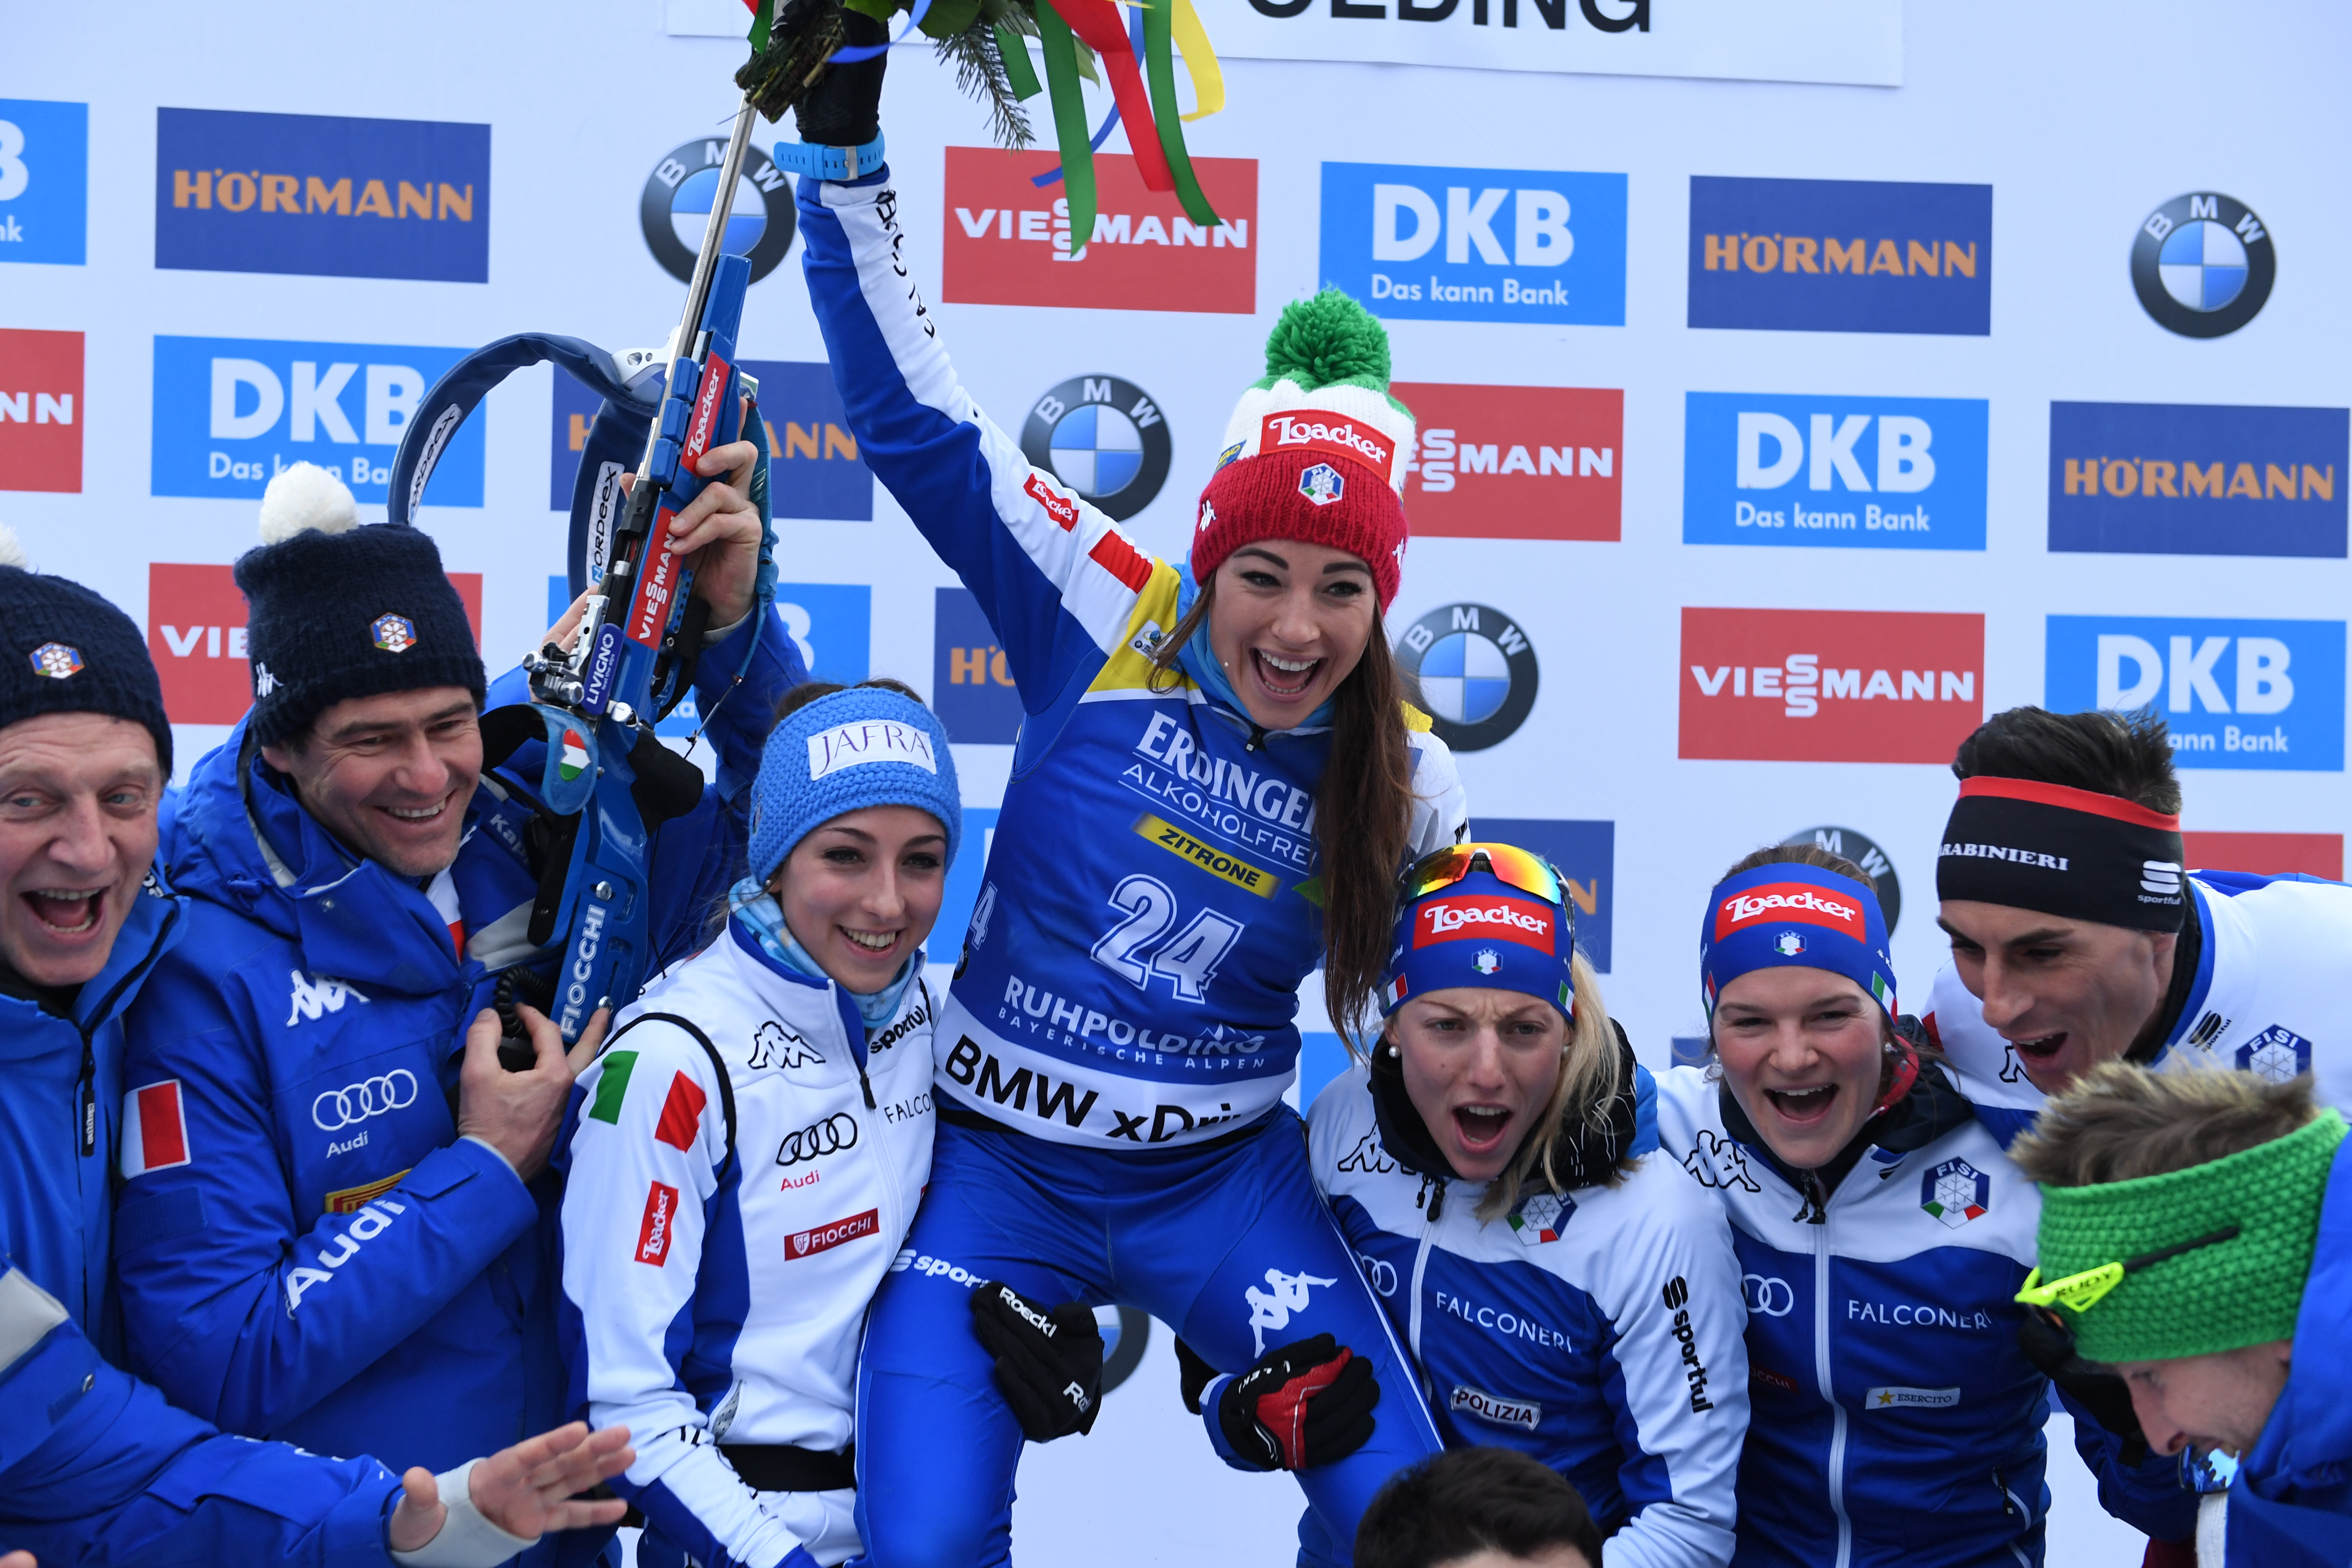 GOLD, SILVER AND MANY GOOD PLACEMENTS: ITALY TAKES THE SPOTLIGHT IN RUHPOLDING